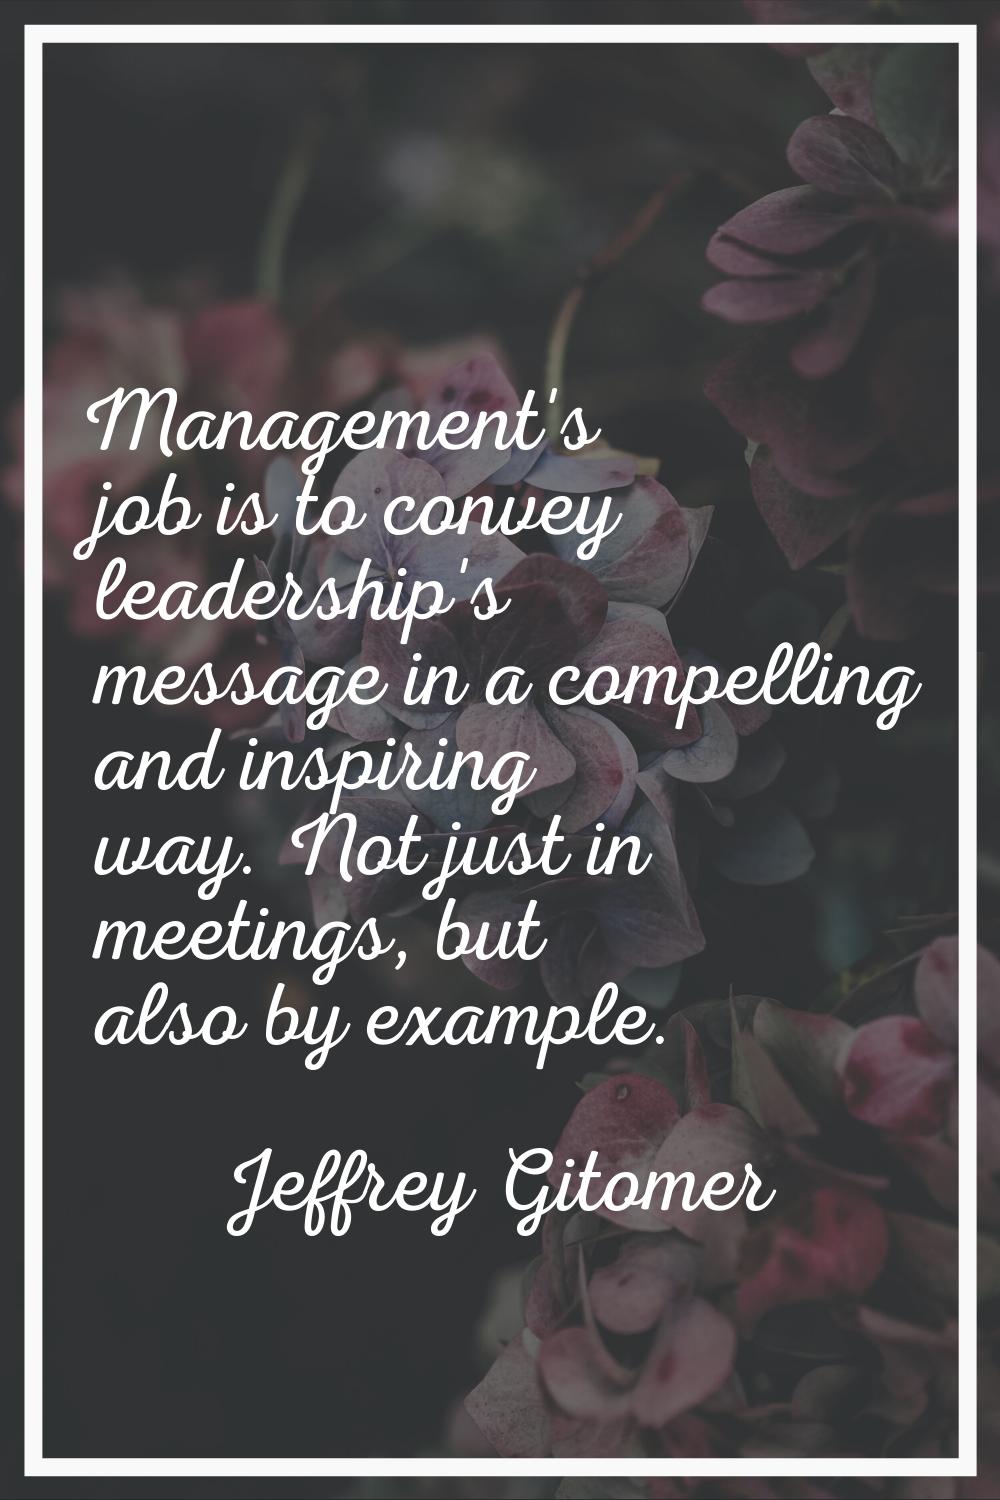 Management's job is to convey leadership's message in a compelling and inspiring way. Not just in m